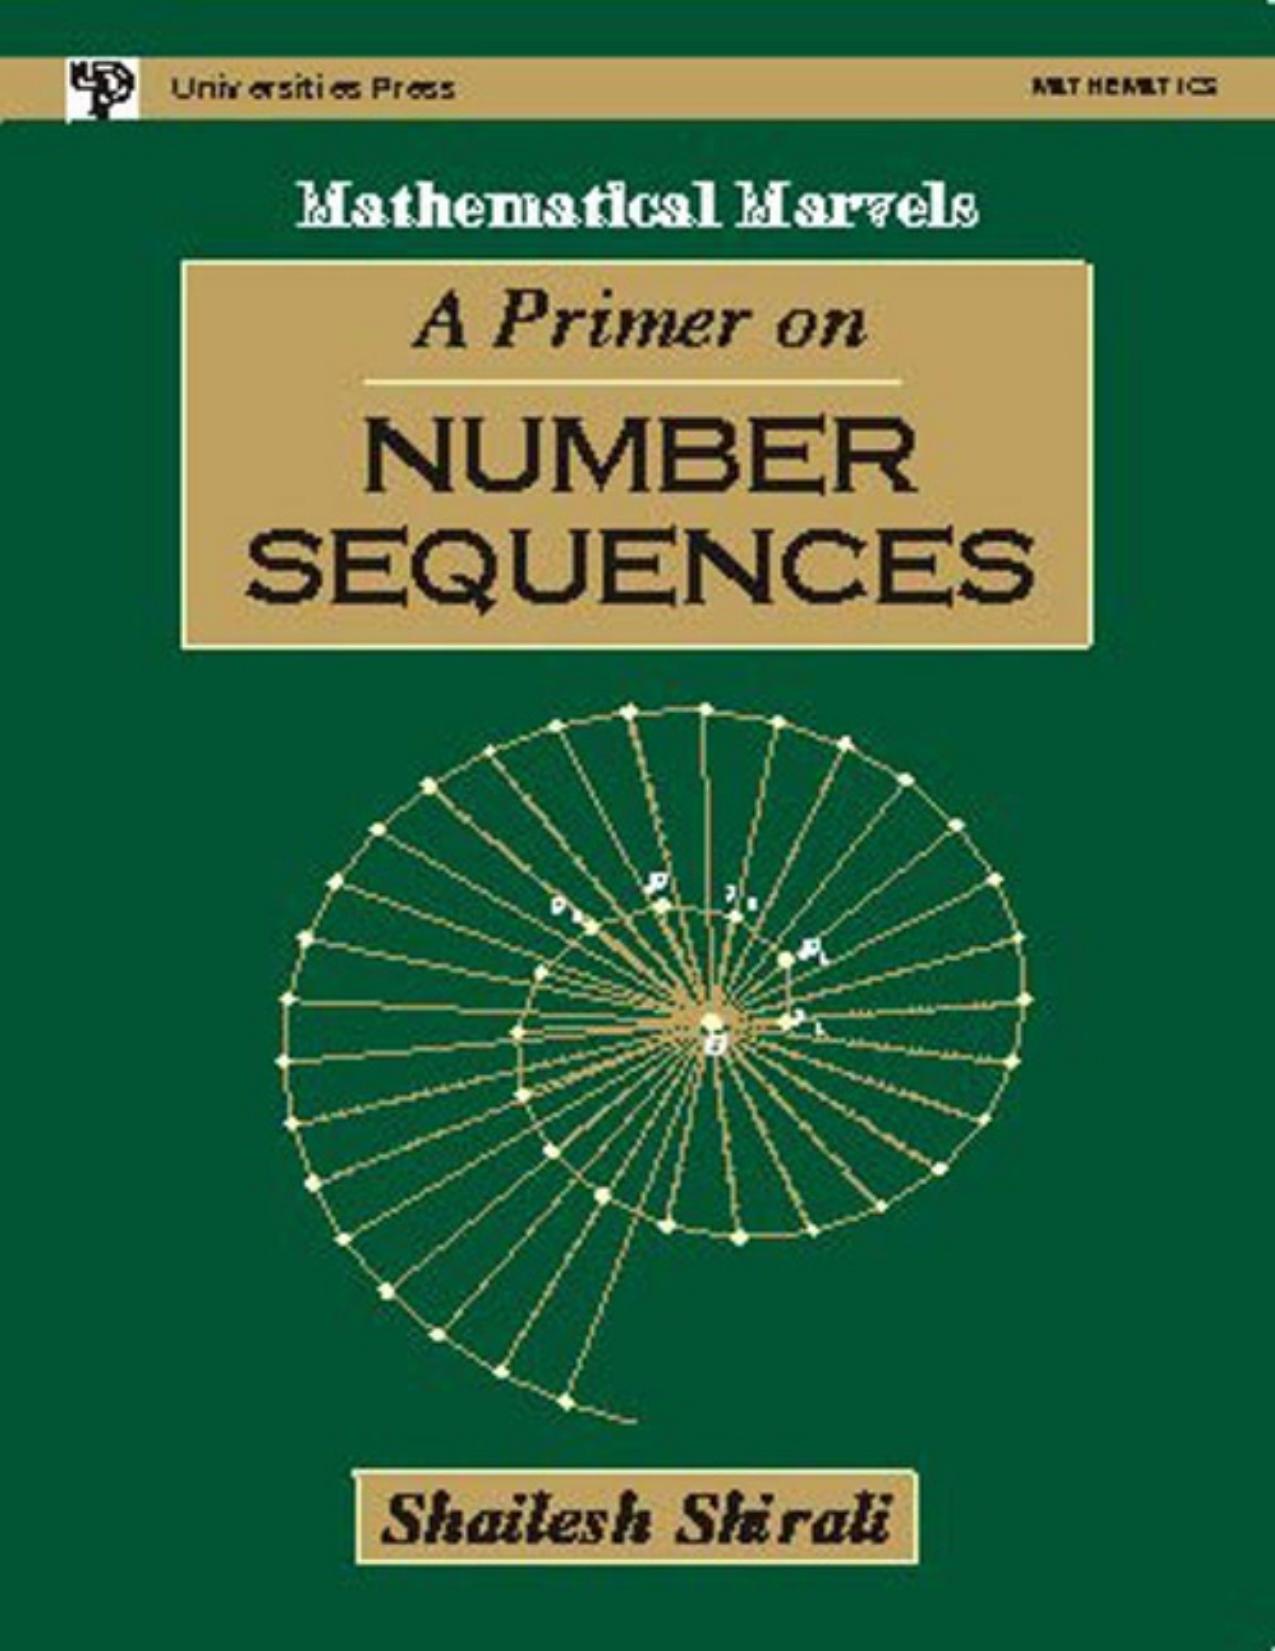 A Primer on Number Sequences